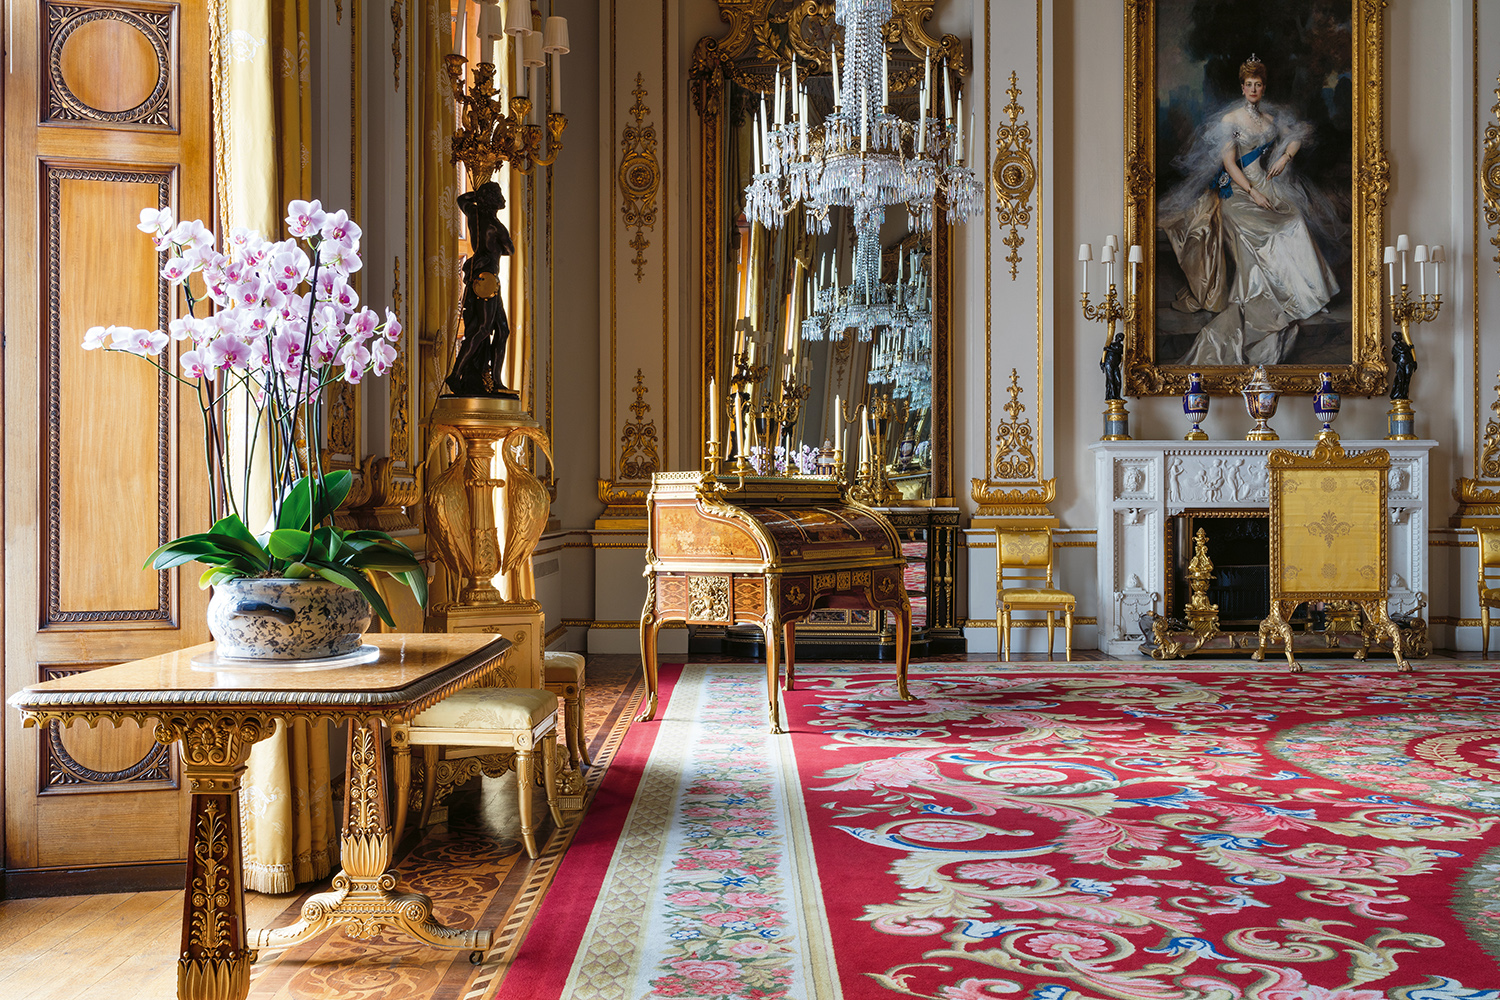 Get a Rare Glimpse of the Royal Family’s Private Rooms at